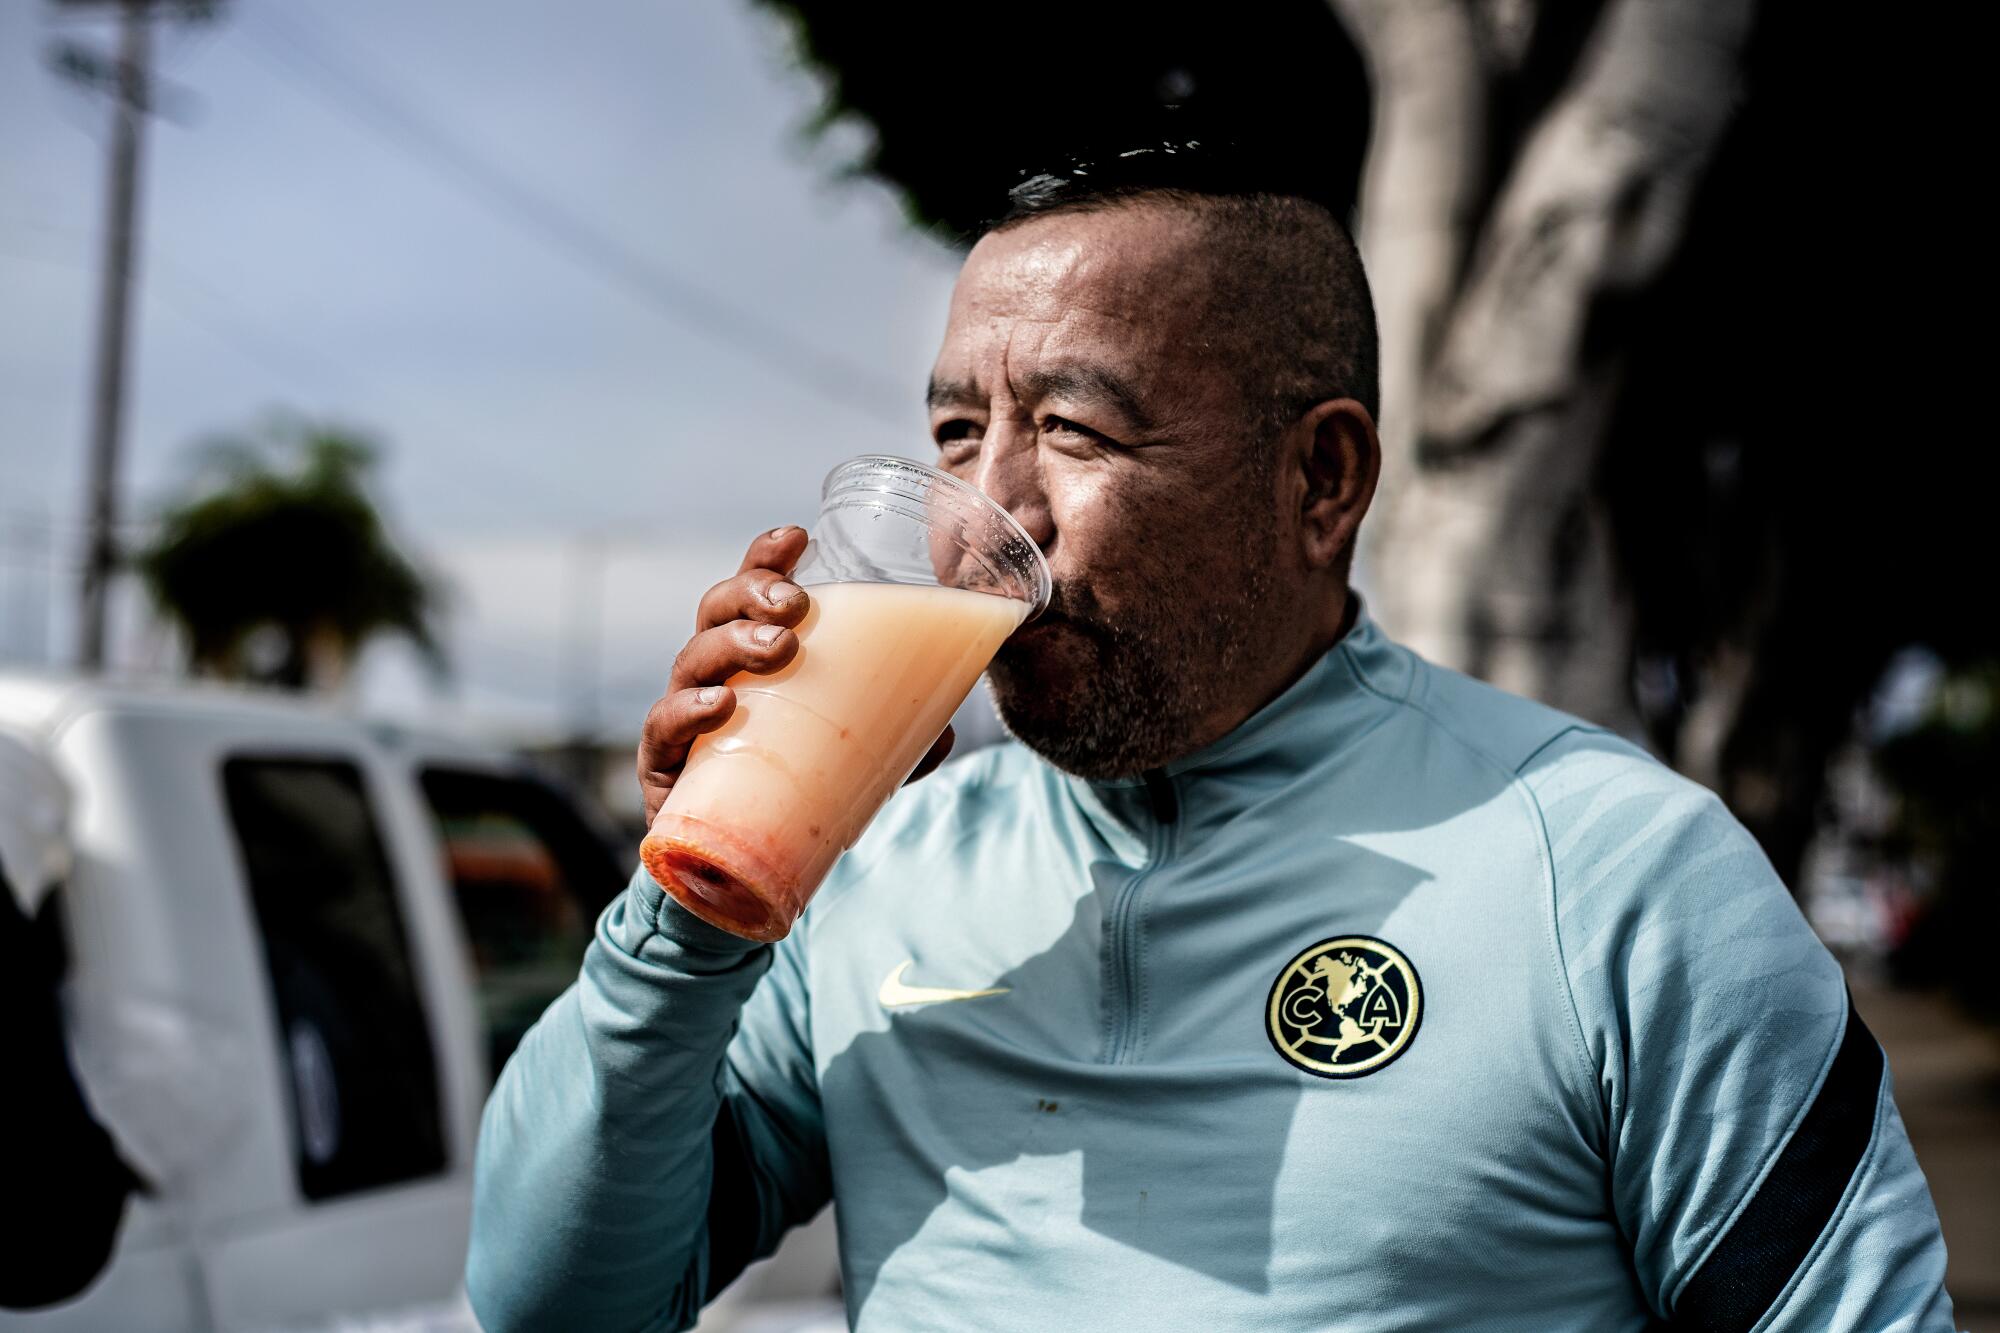 A man drinking from a large plastic cup full of pulque.